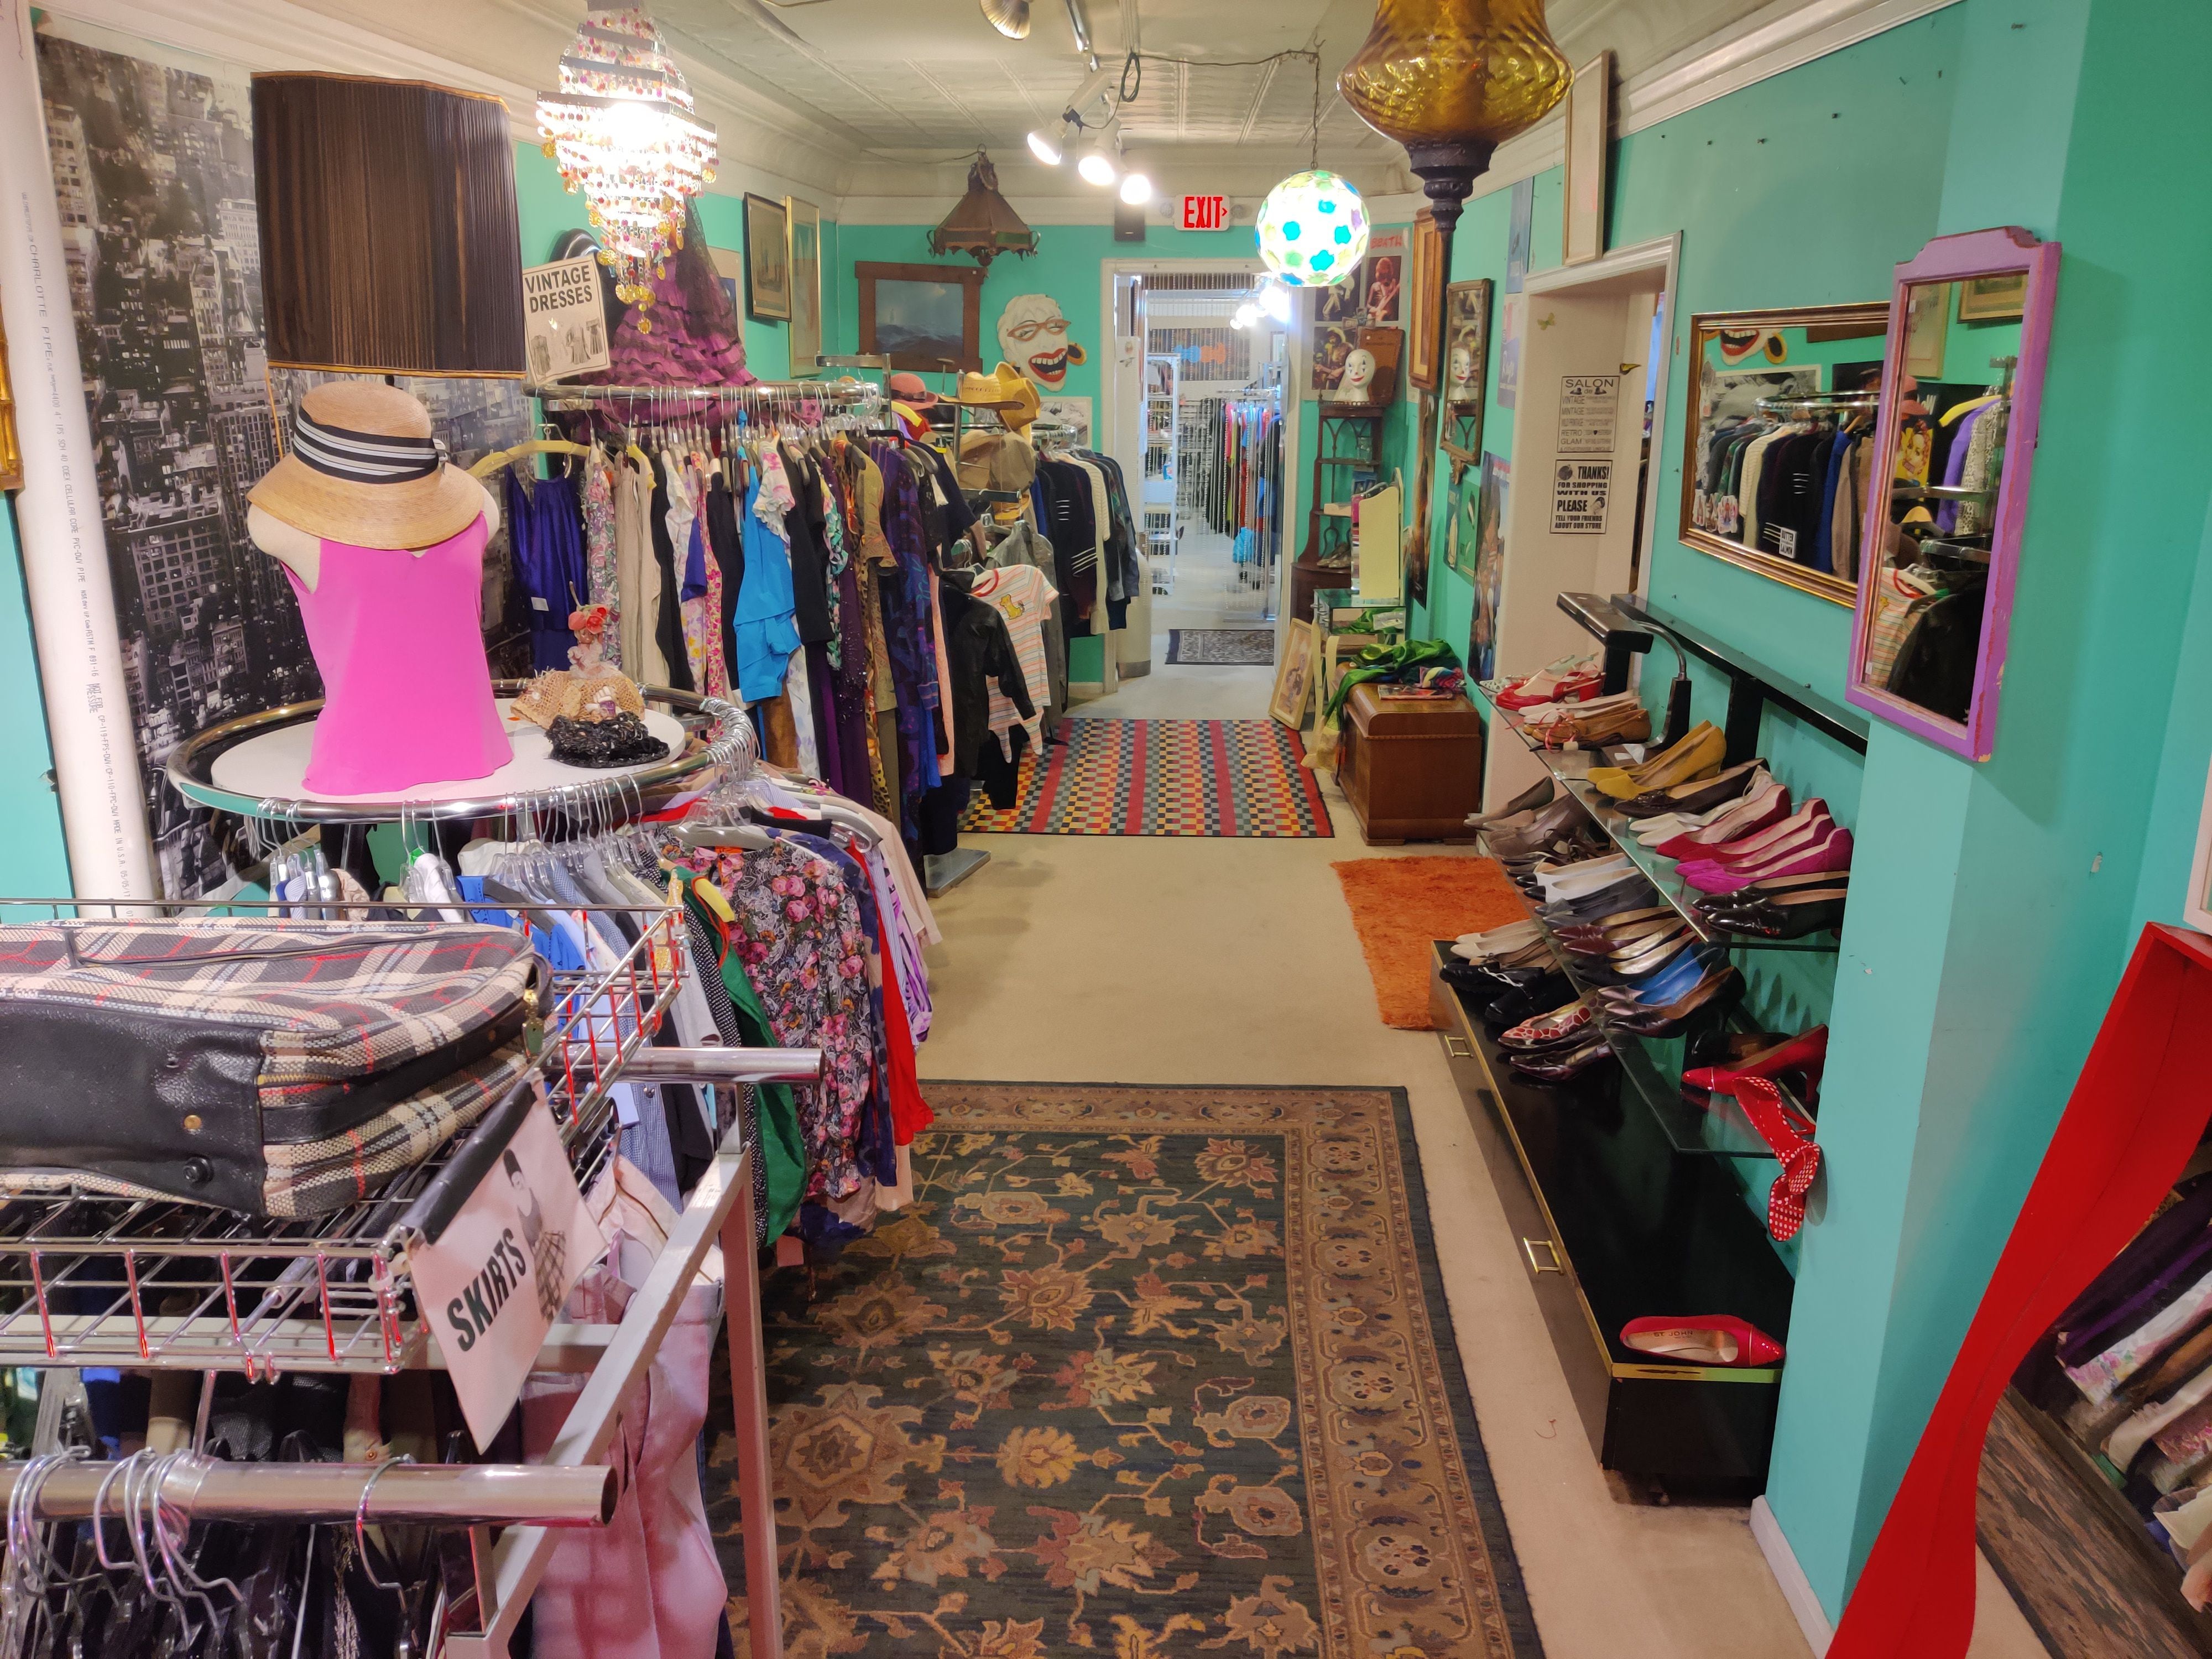 Interior of the Berkowitz dry goods and clothing store in Old Forge